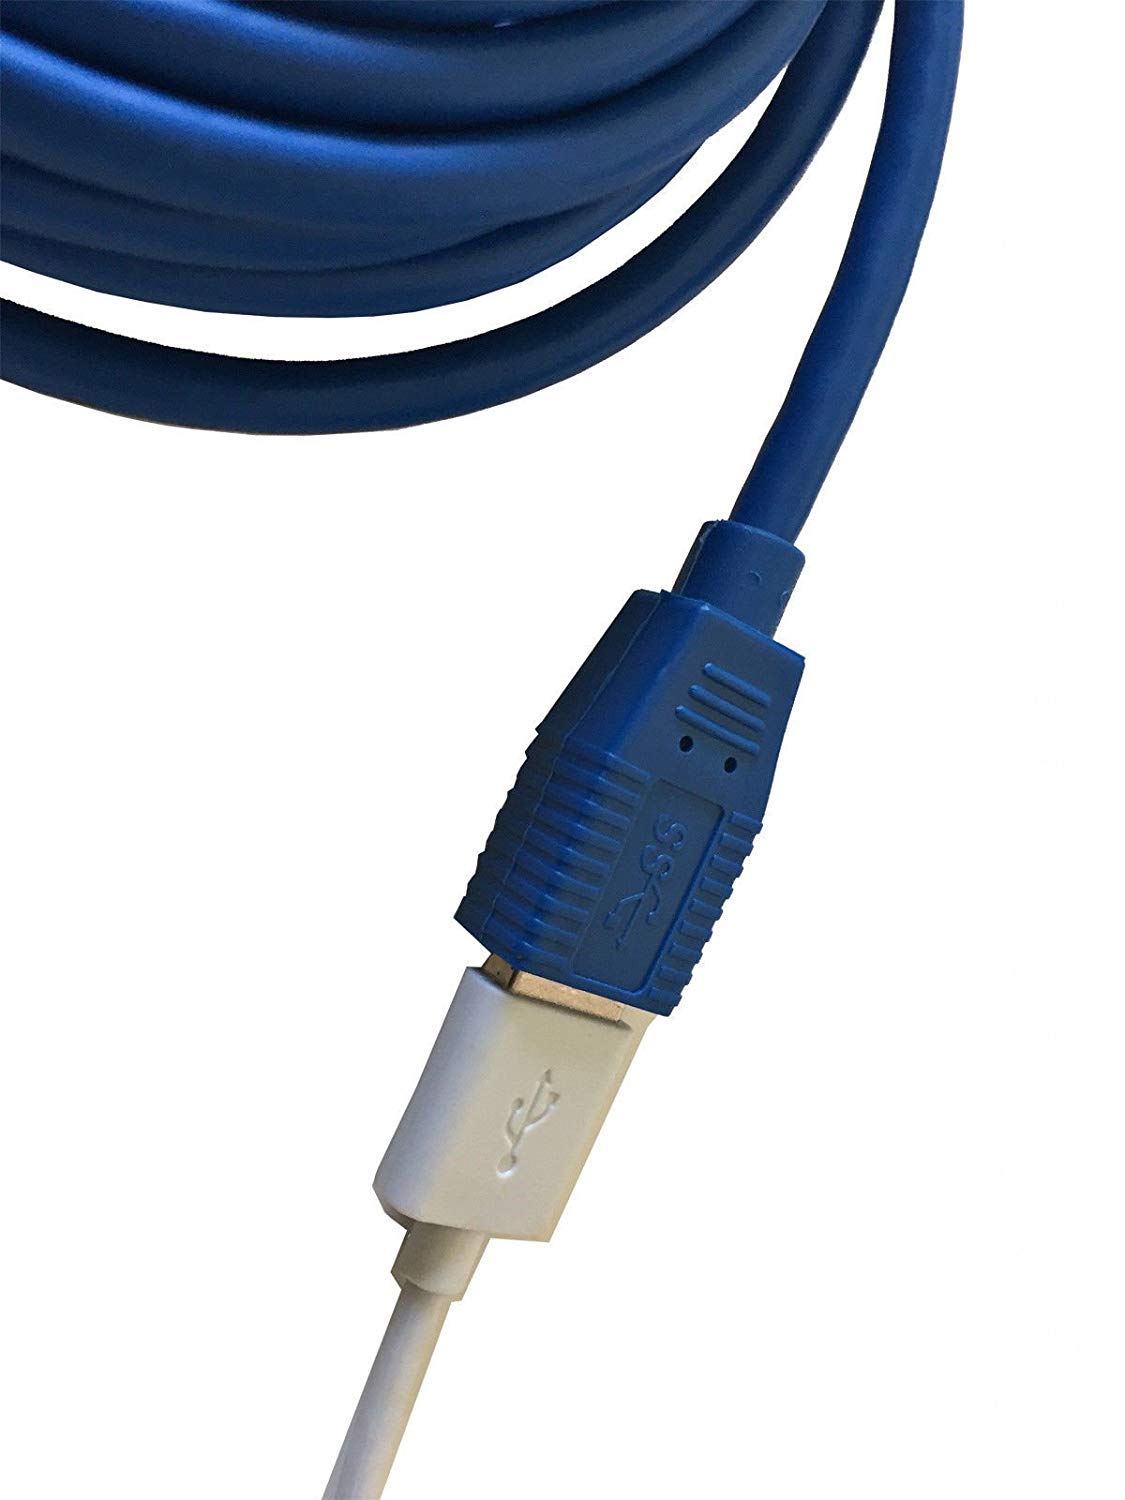 USB 3.0 SuperSpeed Male A to Female A Extension Cable Blue w/Gold Connector (3Ft, 6Ft, 10Ft, 15Ft)